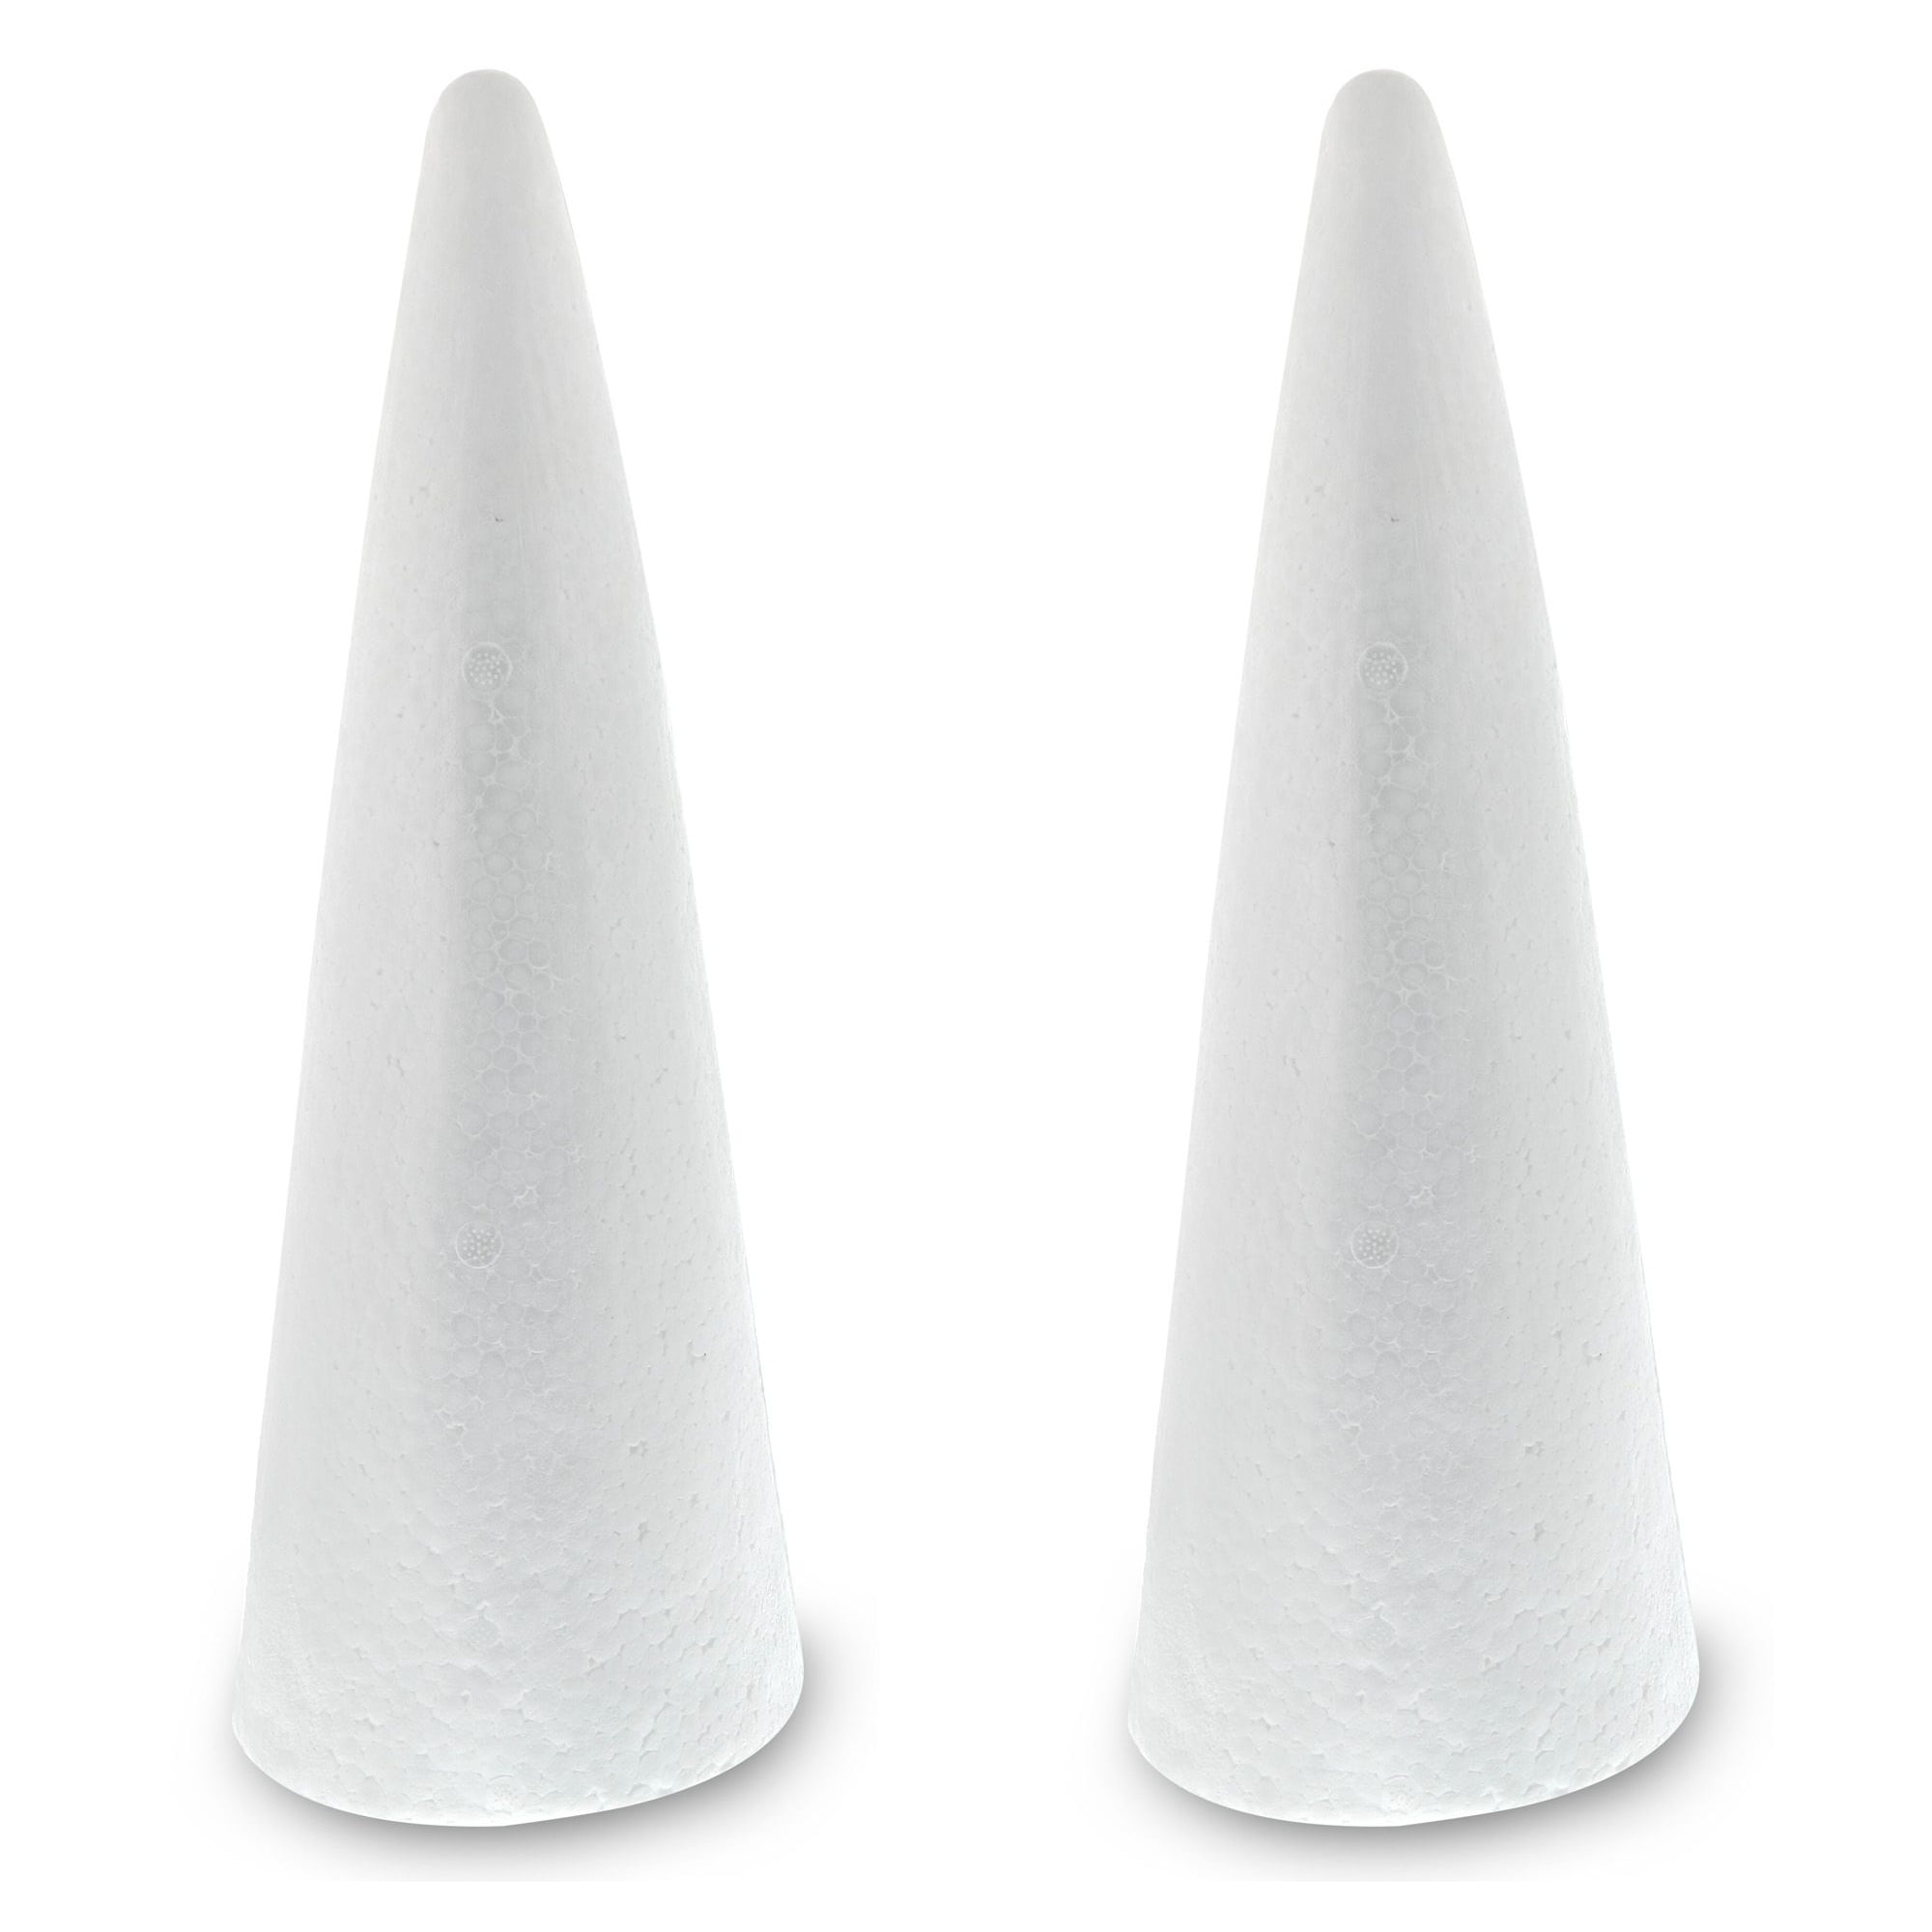 Foam Cones for Crafts (2.7 x 5.5 in, White, 12 Pack)